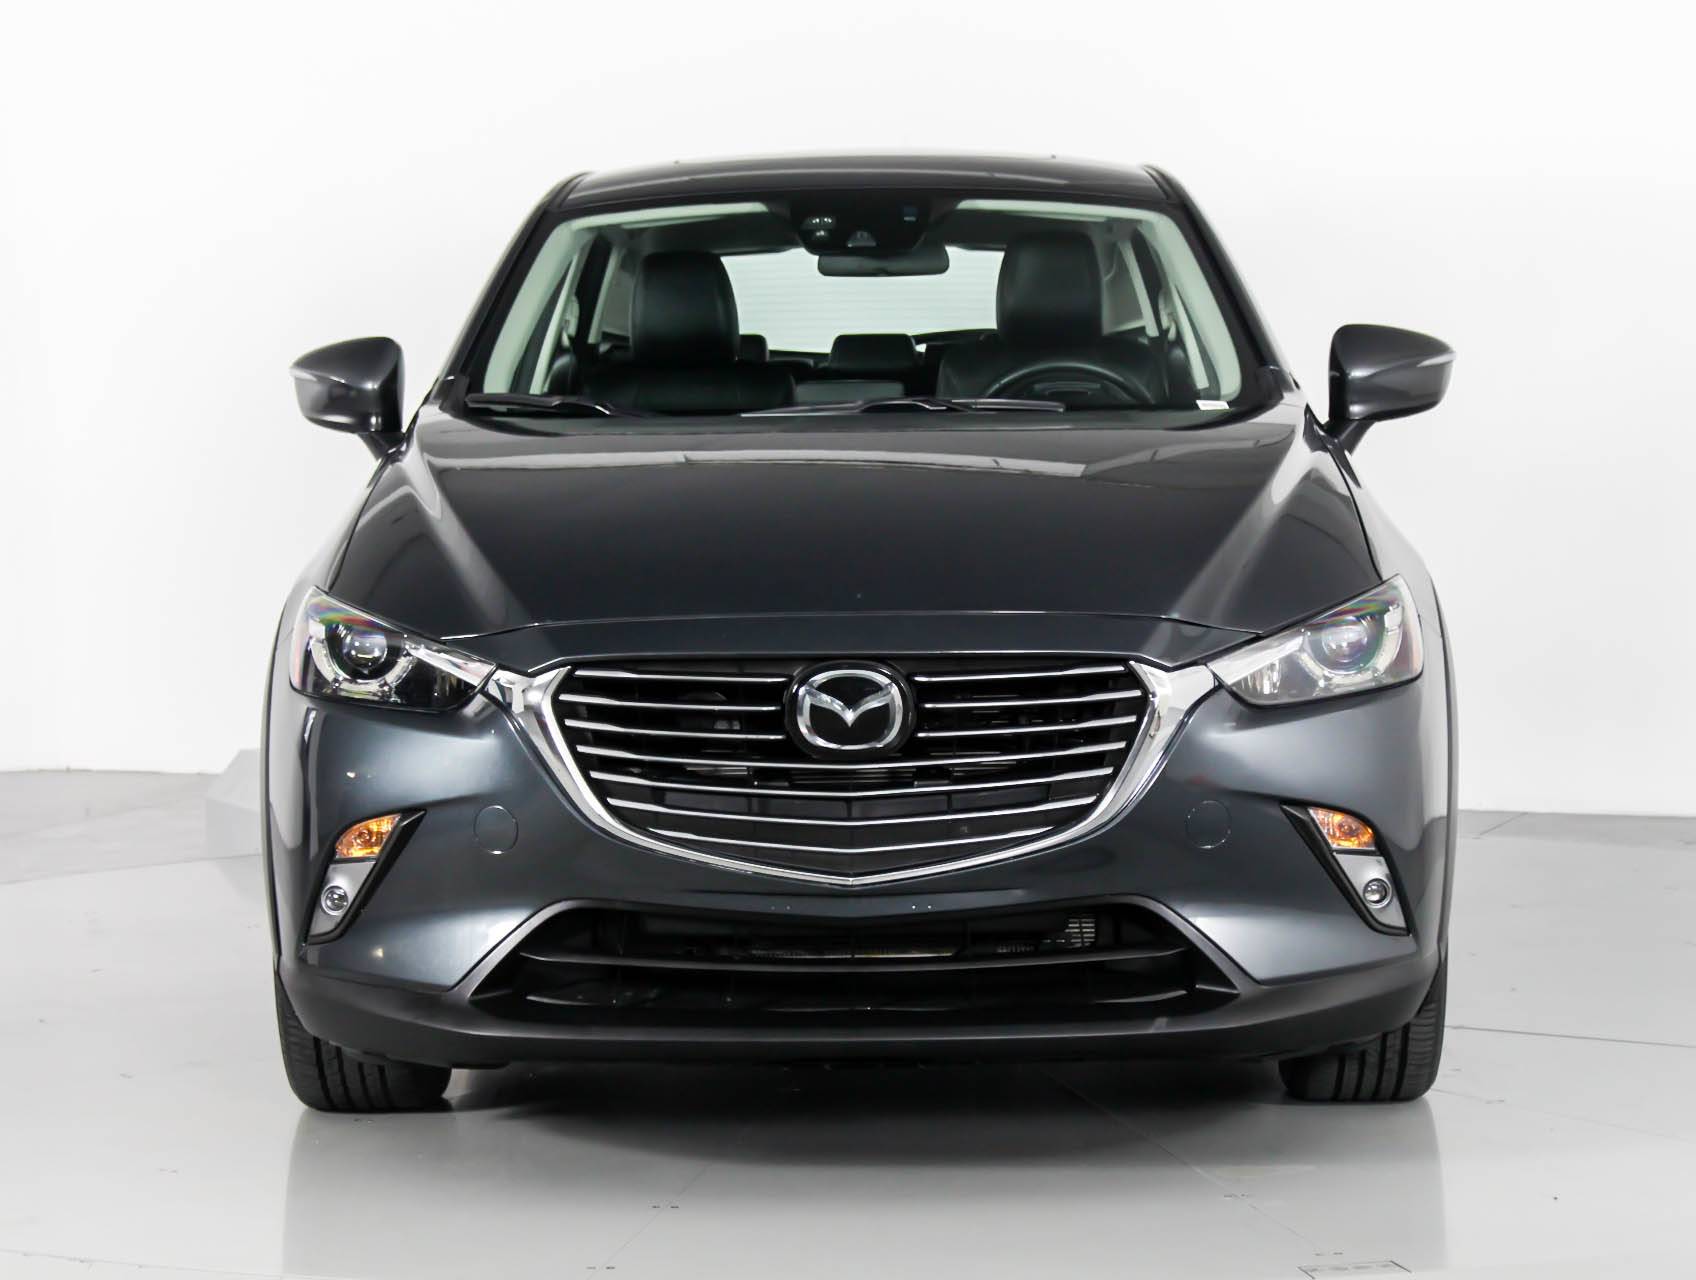 Florida Fine Cars - Used MAZDA CX 3 2016 WEST PALM GRAND TOURING